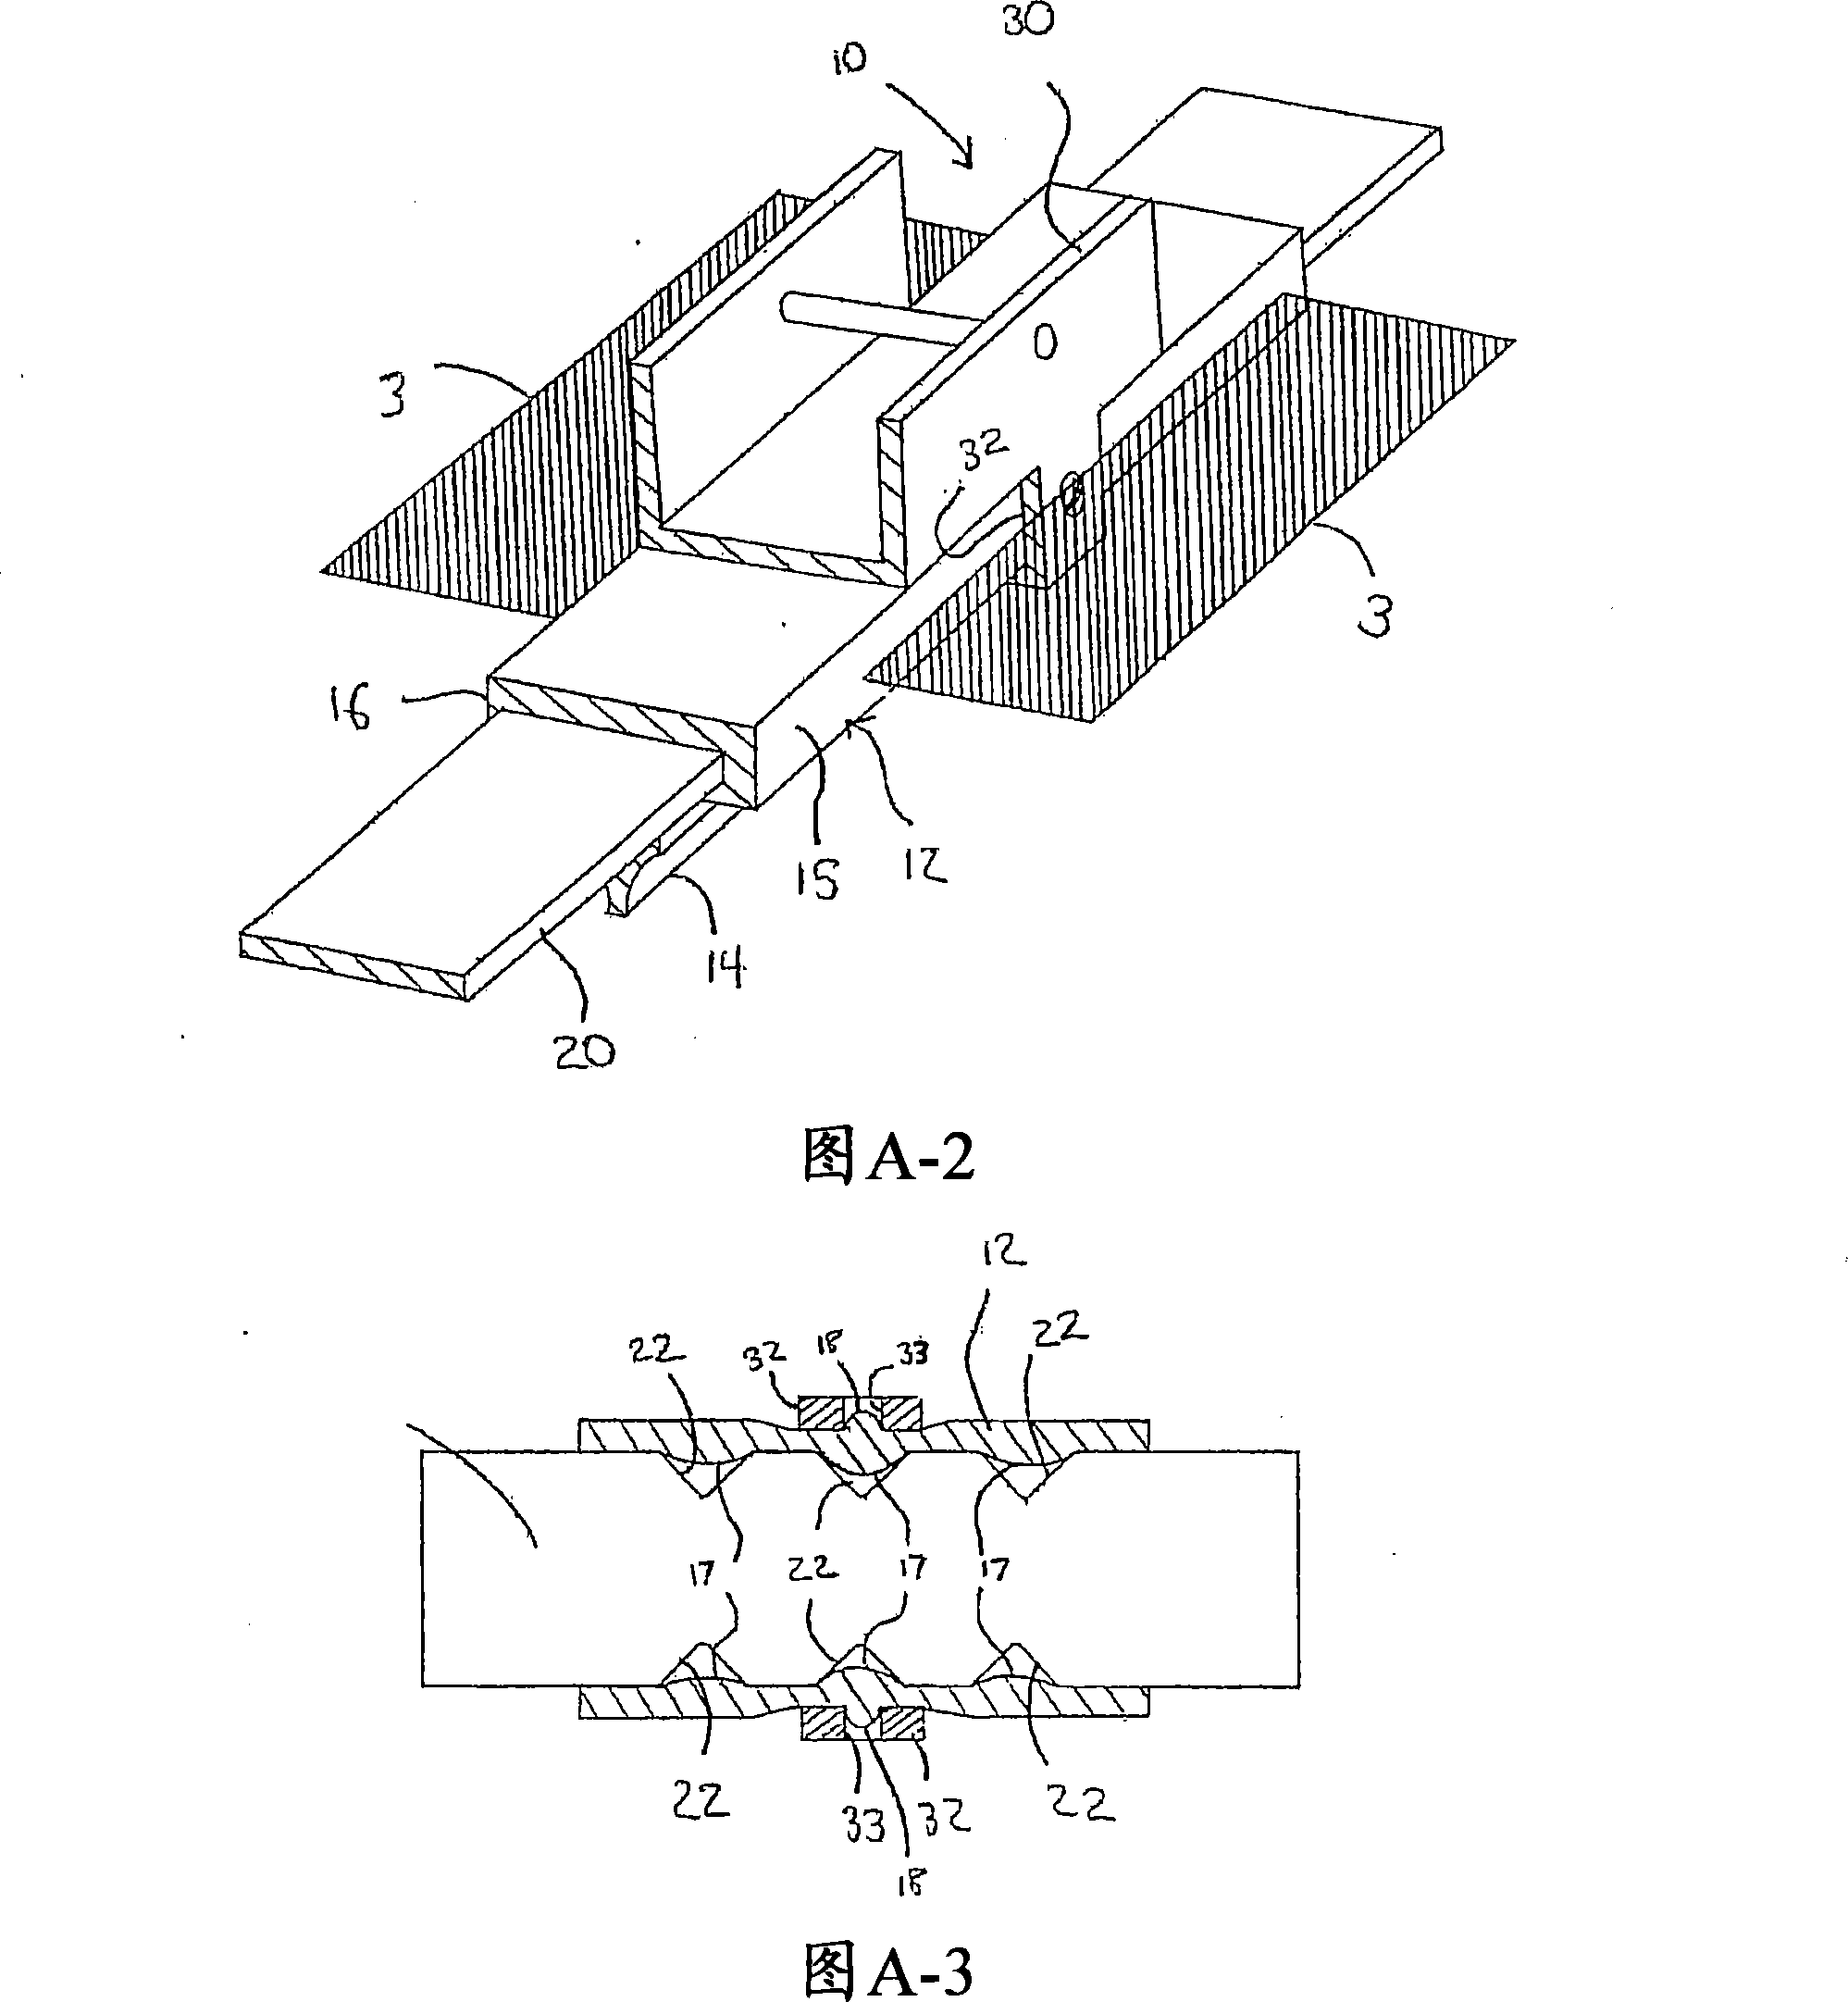 Windshield wiper blade assembly with axial translation prevention system